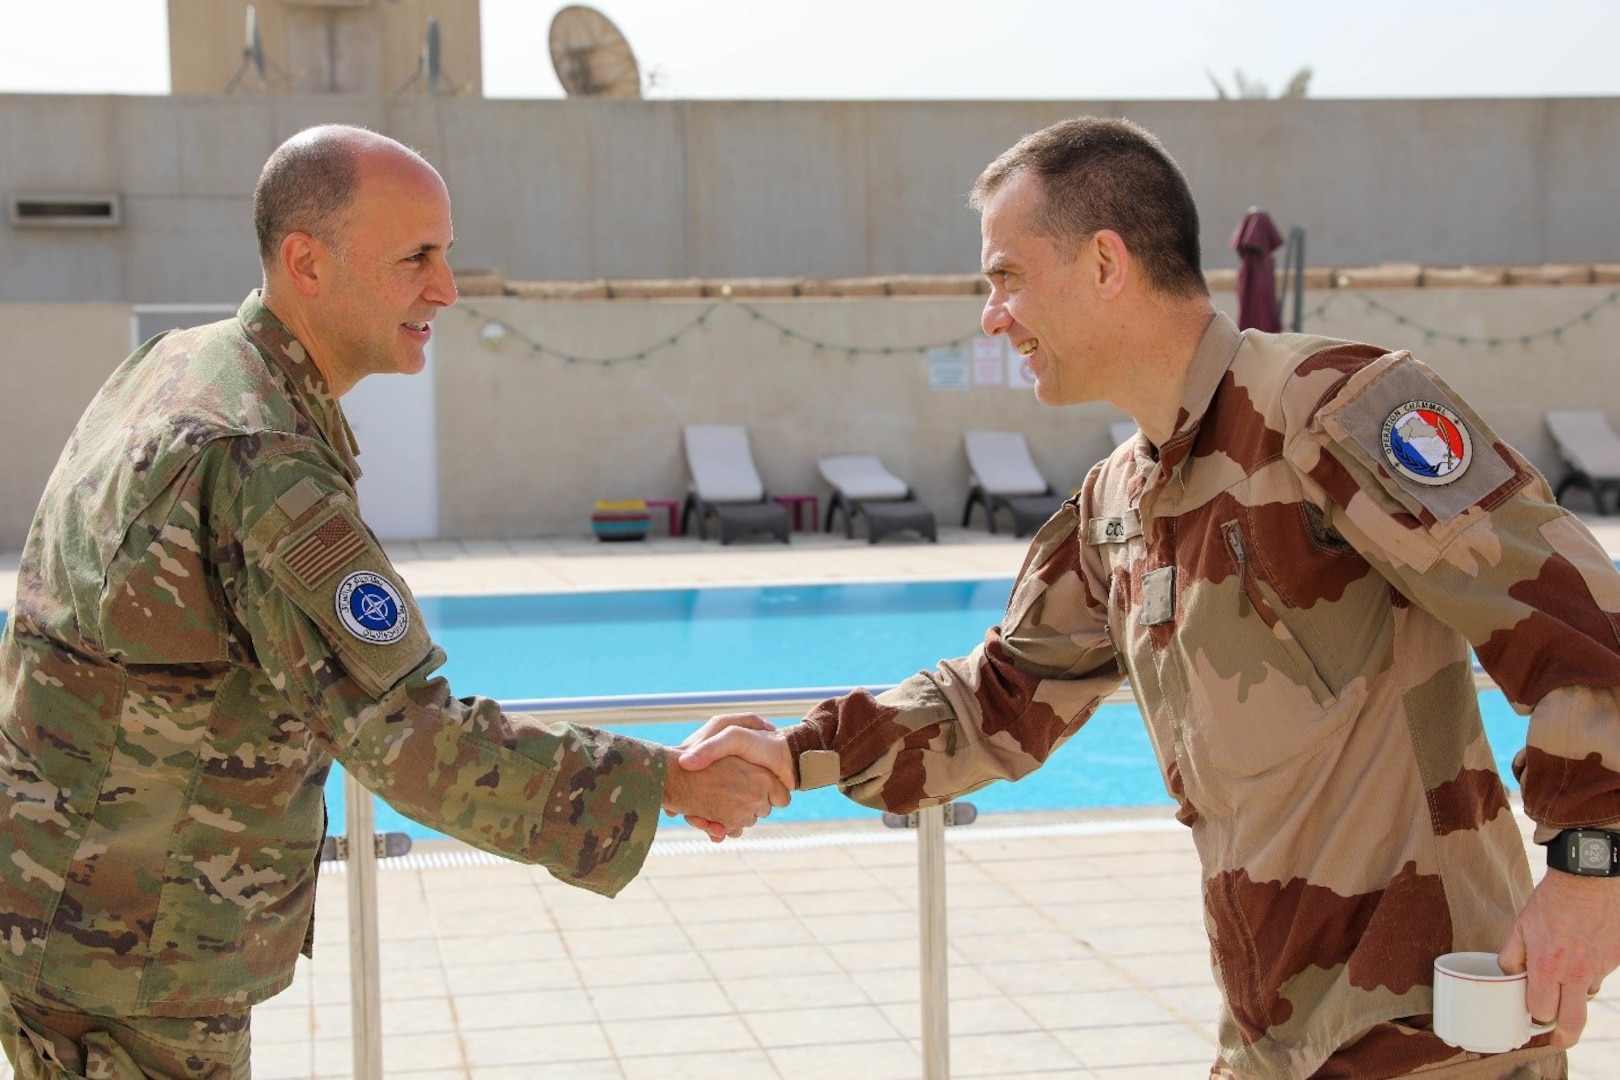 U.S. Air force Brig. Gen. Don Bevis, Senior commanding North Atlantic Treaty Organization – mission Iraq and a French coalition member shake hands before the defense attaché forum convenes in Baghdad, Iraq, March 17, 2022. The defense attaché forum serves as an opportunity to build-relationships among Global Coalition members, and as a gateway to discuss topics pertaining to the enduring defeat of Da’esh including Combined Joint Task Force – Operation Inherent Resolve’s progress and areas of needed improvement. (U.S. Army photo by Staff Sgt. Bree-Ann Ramos-Clifton)